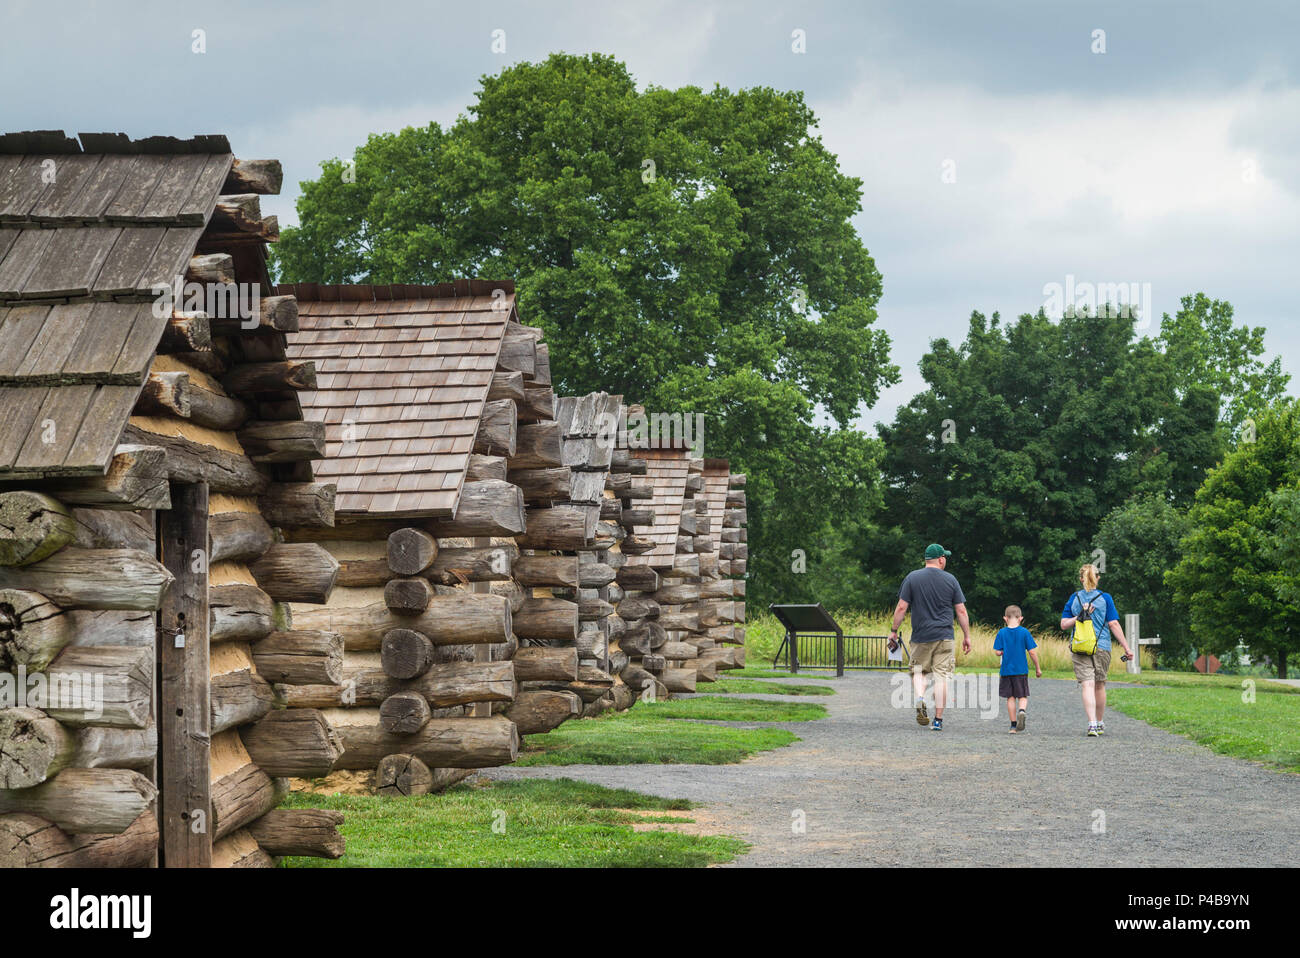 USA, Pennsylvania, King of Prussia, Valley Forge National Historical Park, Battlefield of the American Revolutionary War, Muhlenberg Brigade wooden cabins Stock Photo